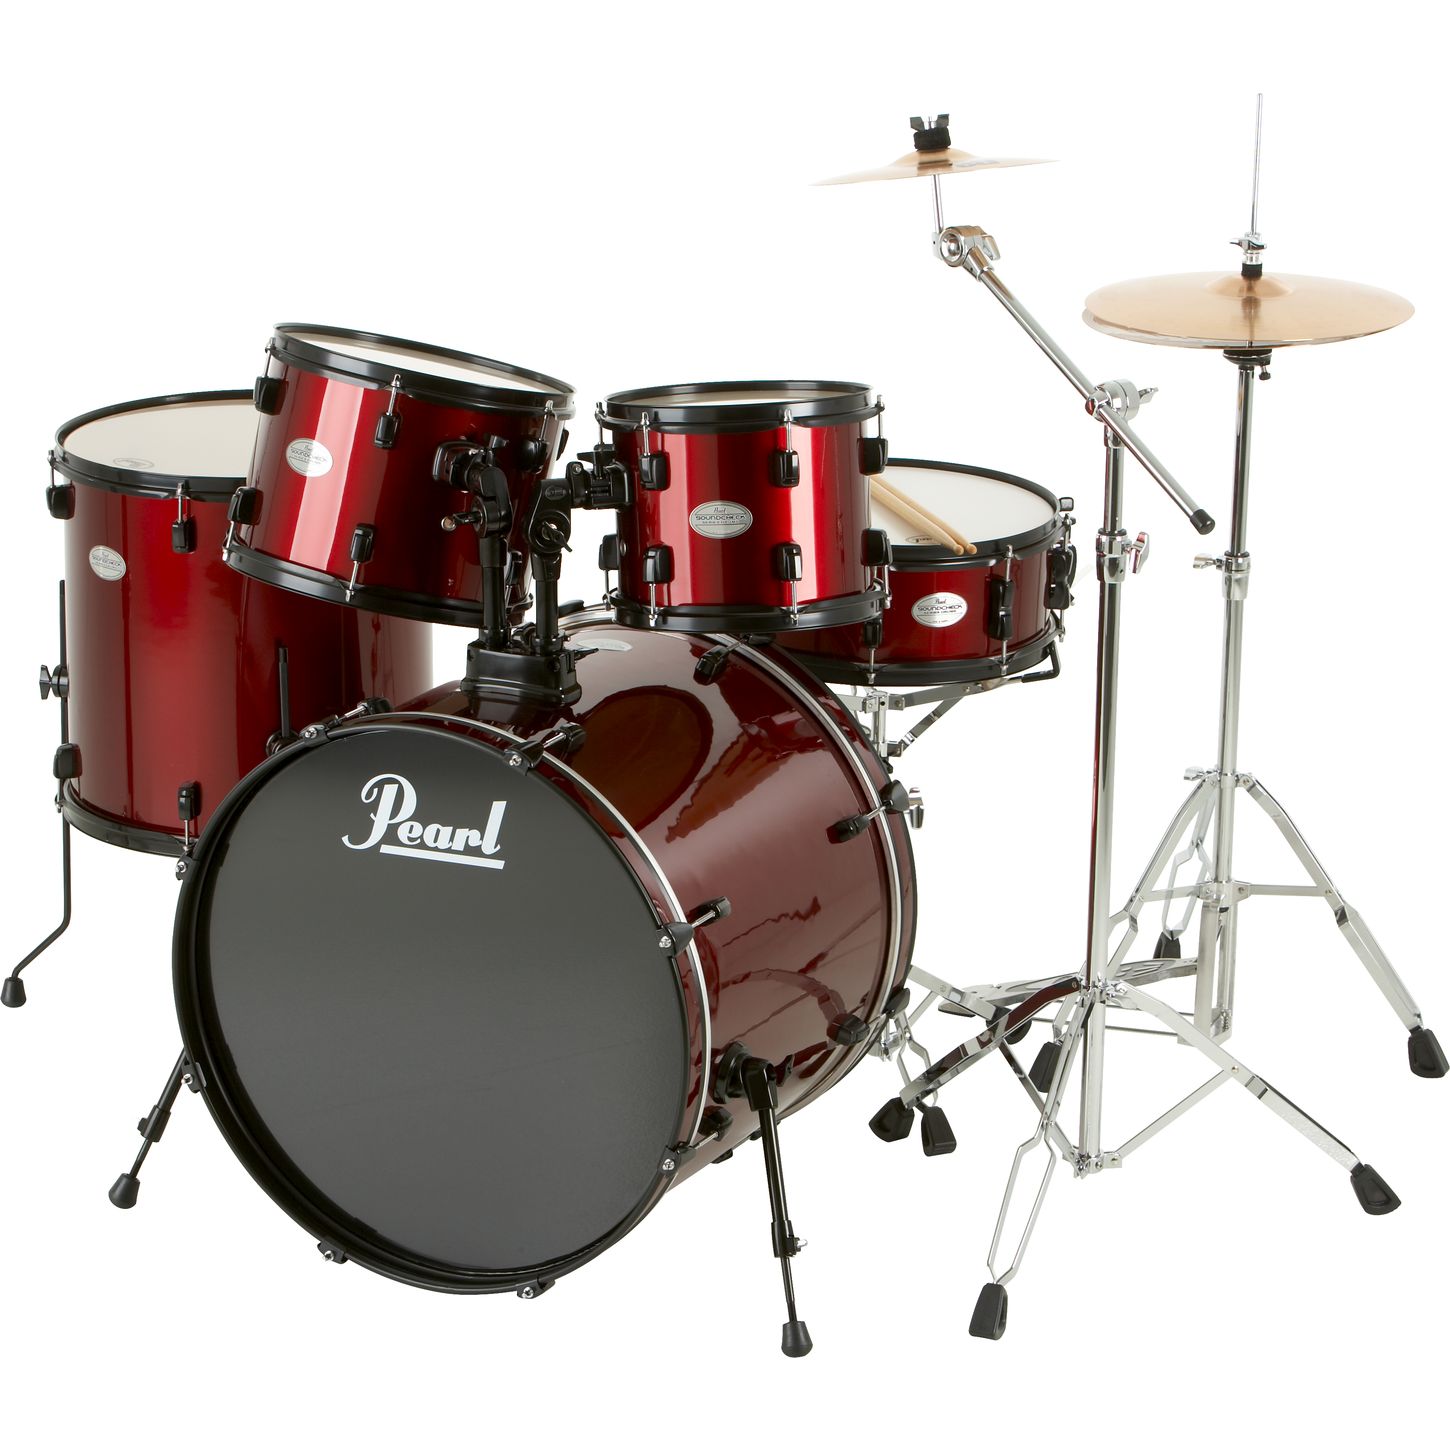 Images of Drums | 1450x1450